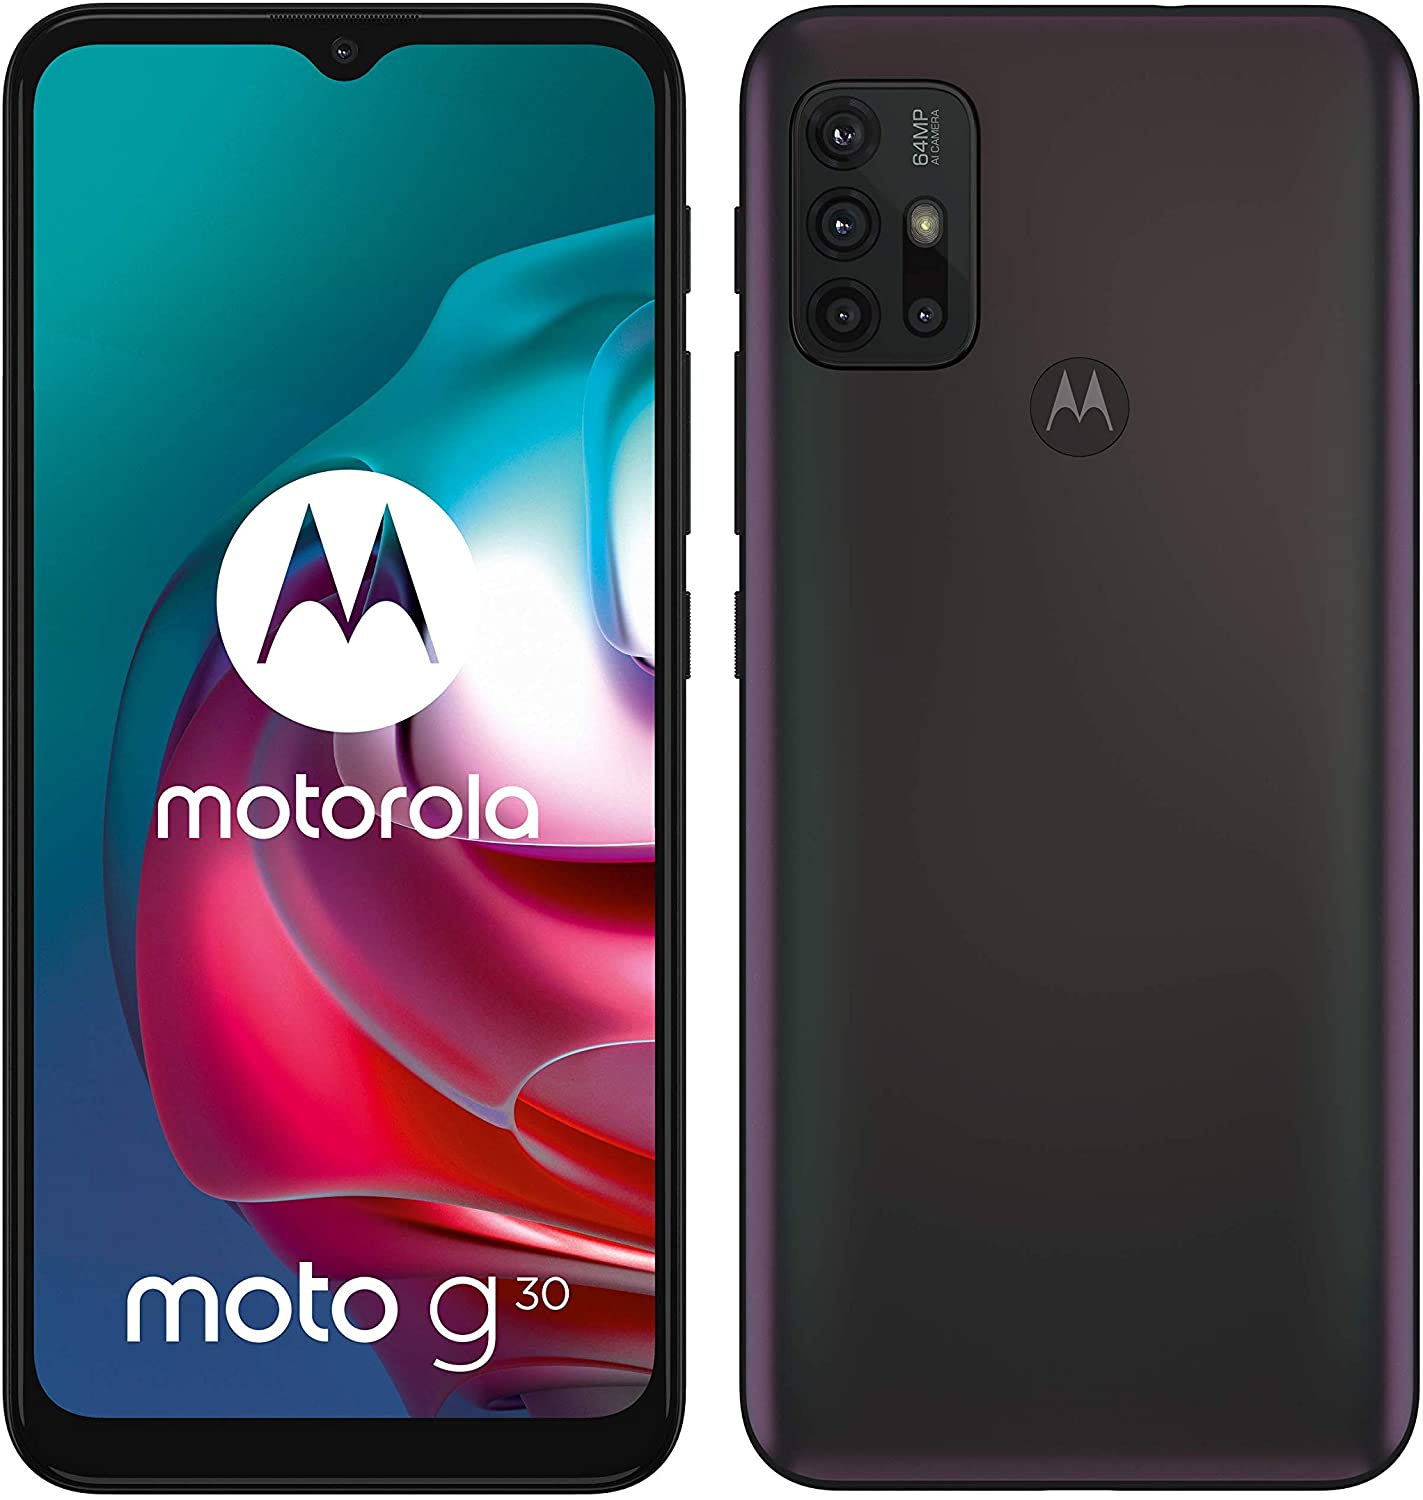 Device does not connect to Wi Fi Motorola Moto G30